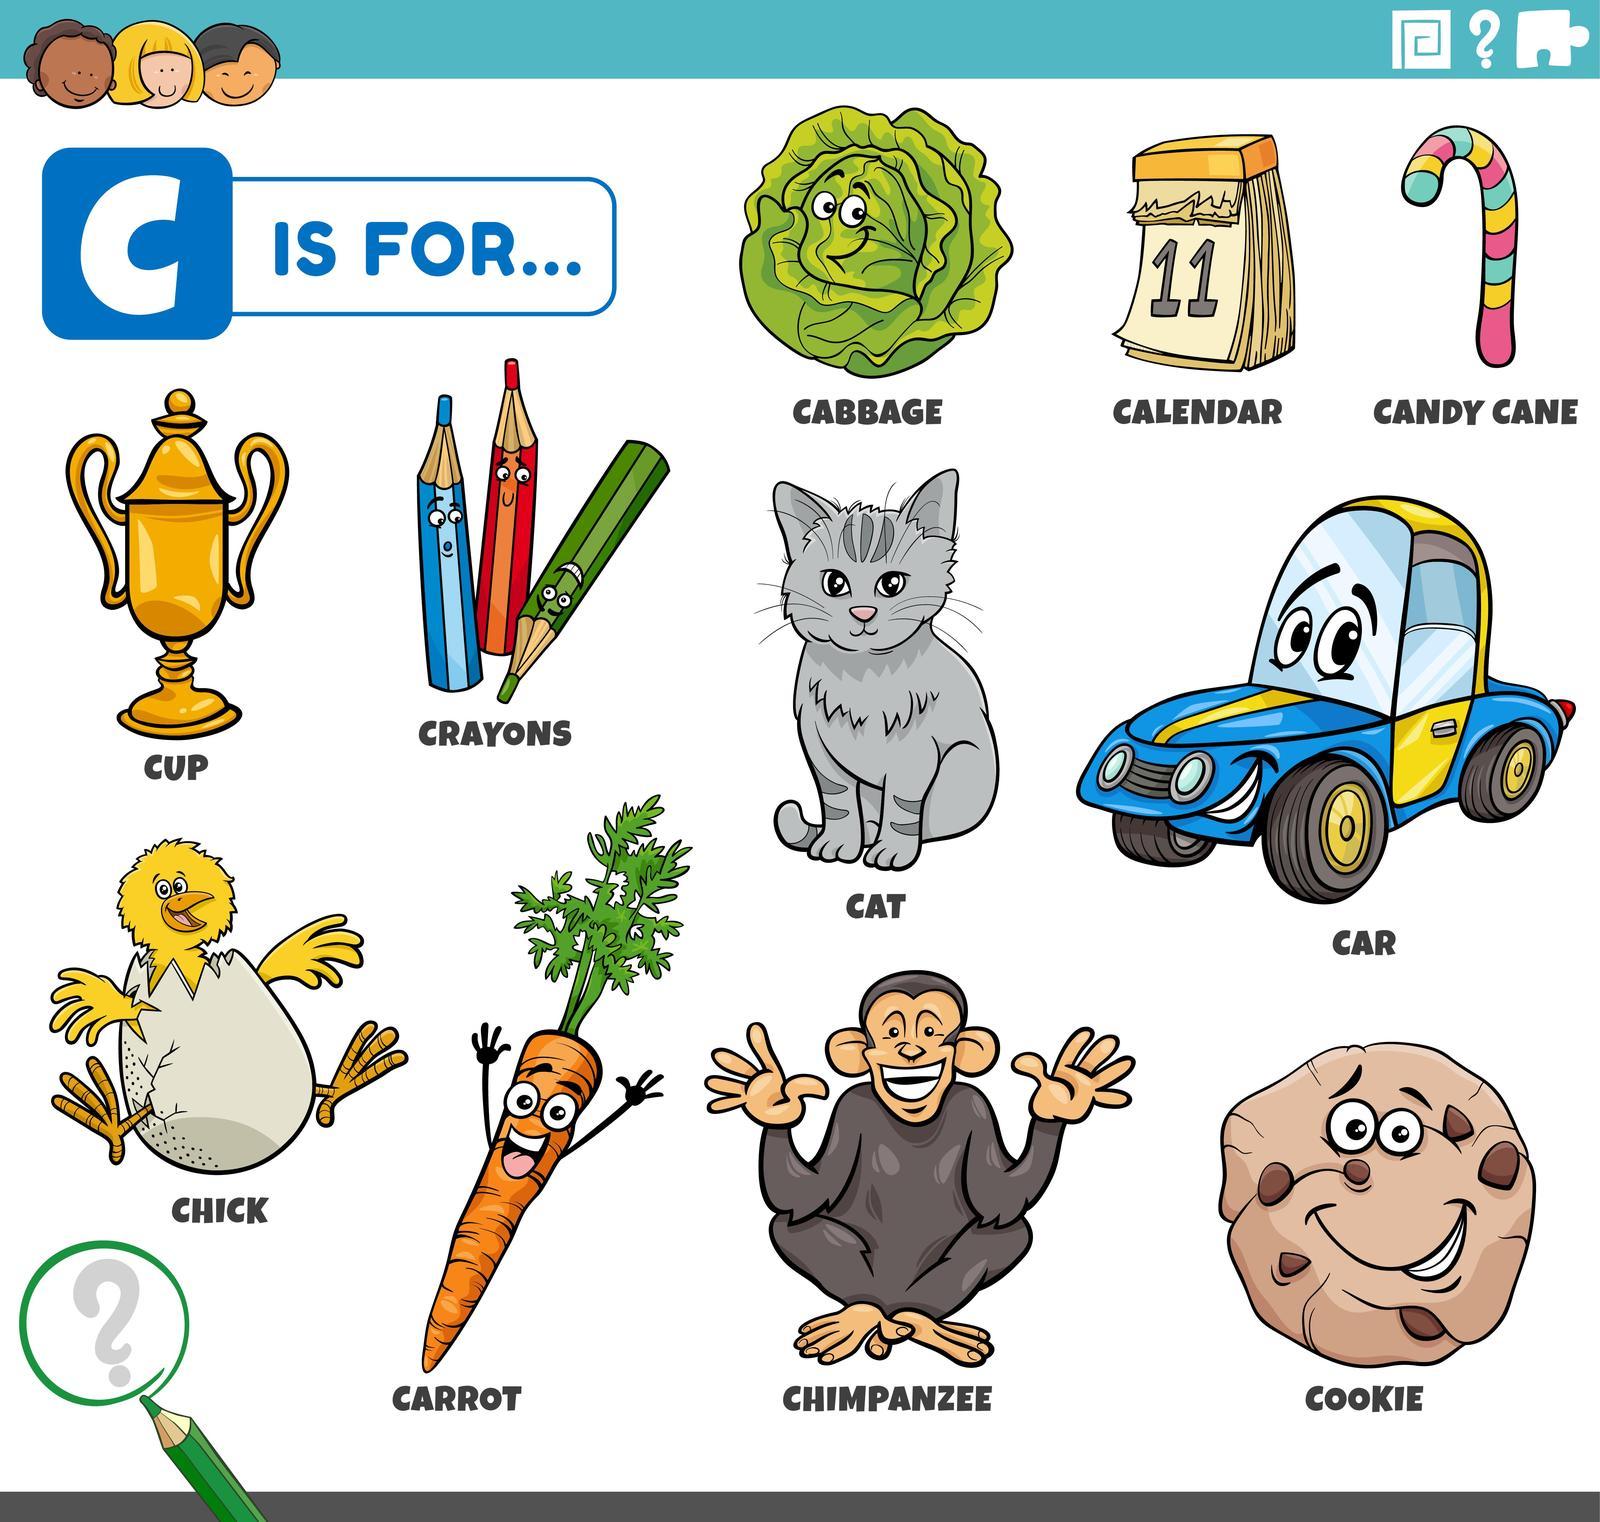 Learn Words starting with Letter C using our Picture Worksheets-Worksheets